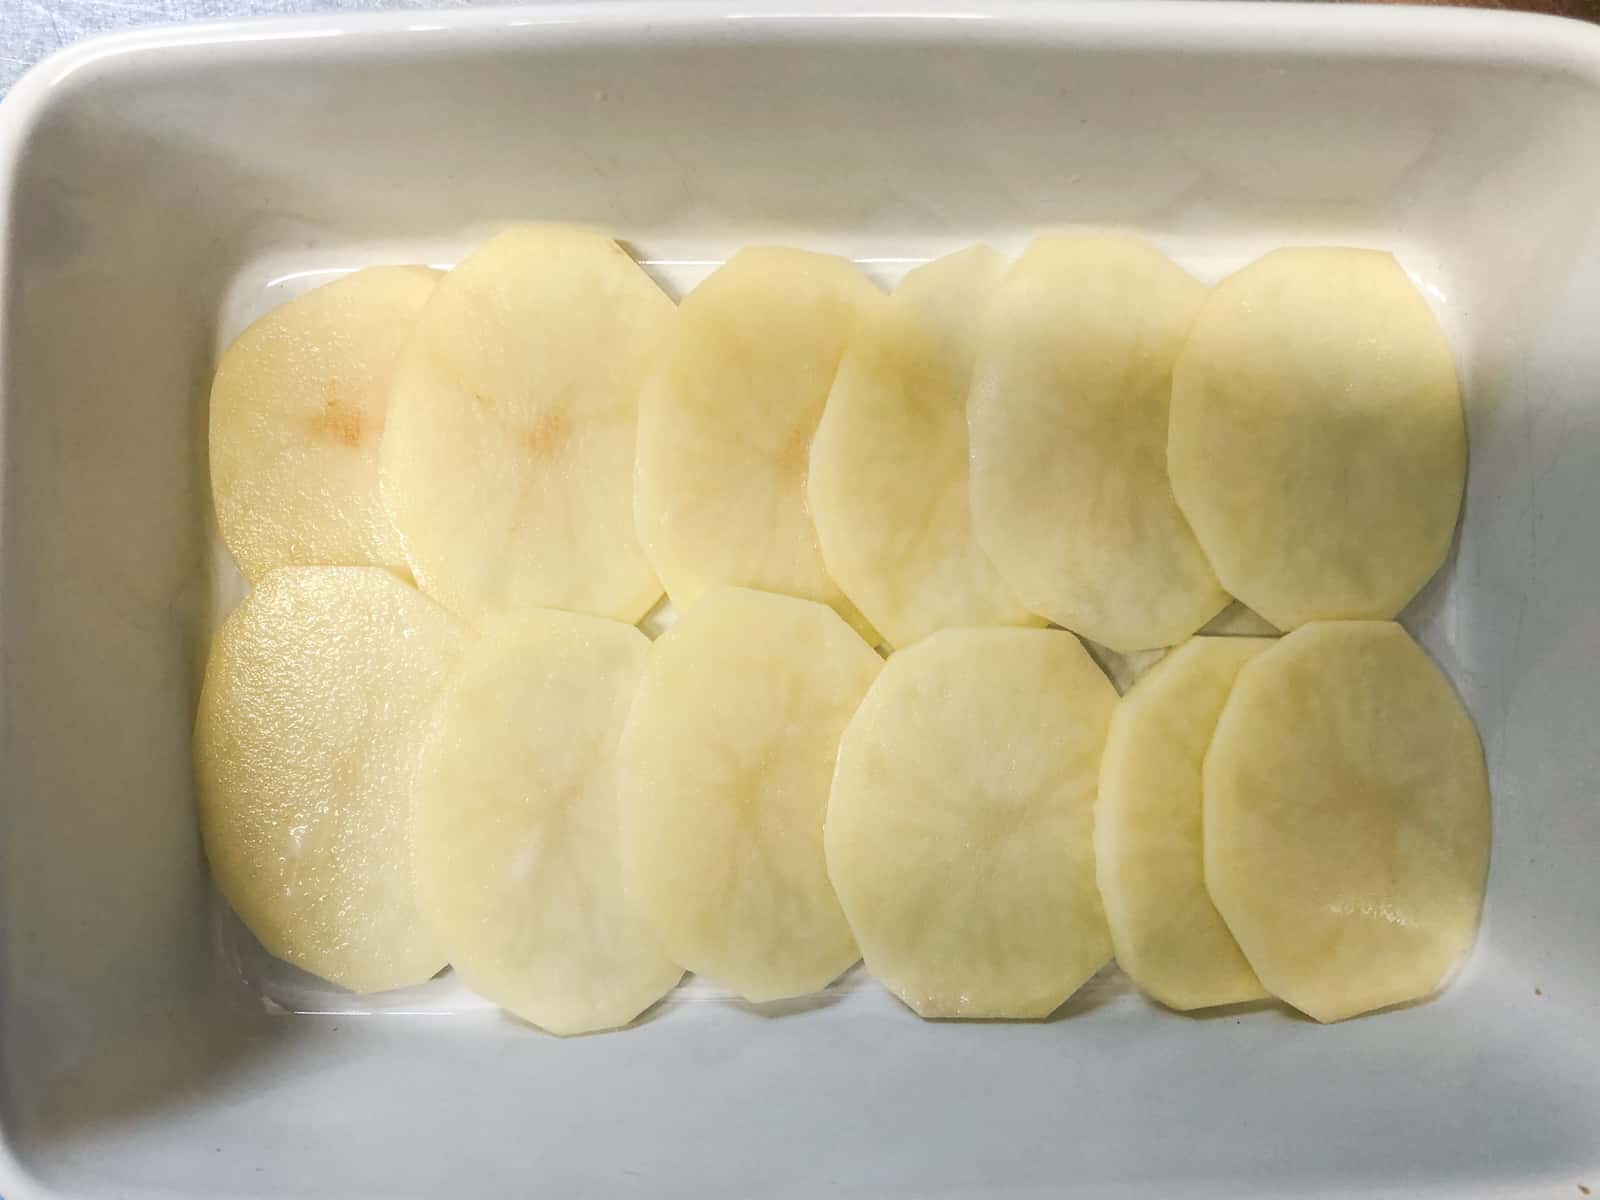 Showing how to prepare a layered boulangere potato dish with slices of potato on the bottom of an oven proof dish.